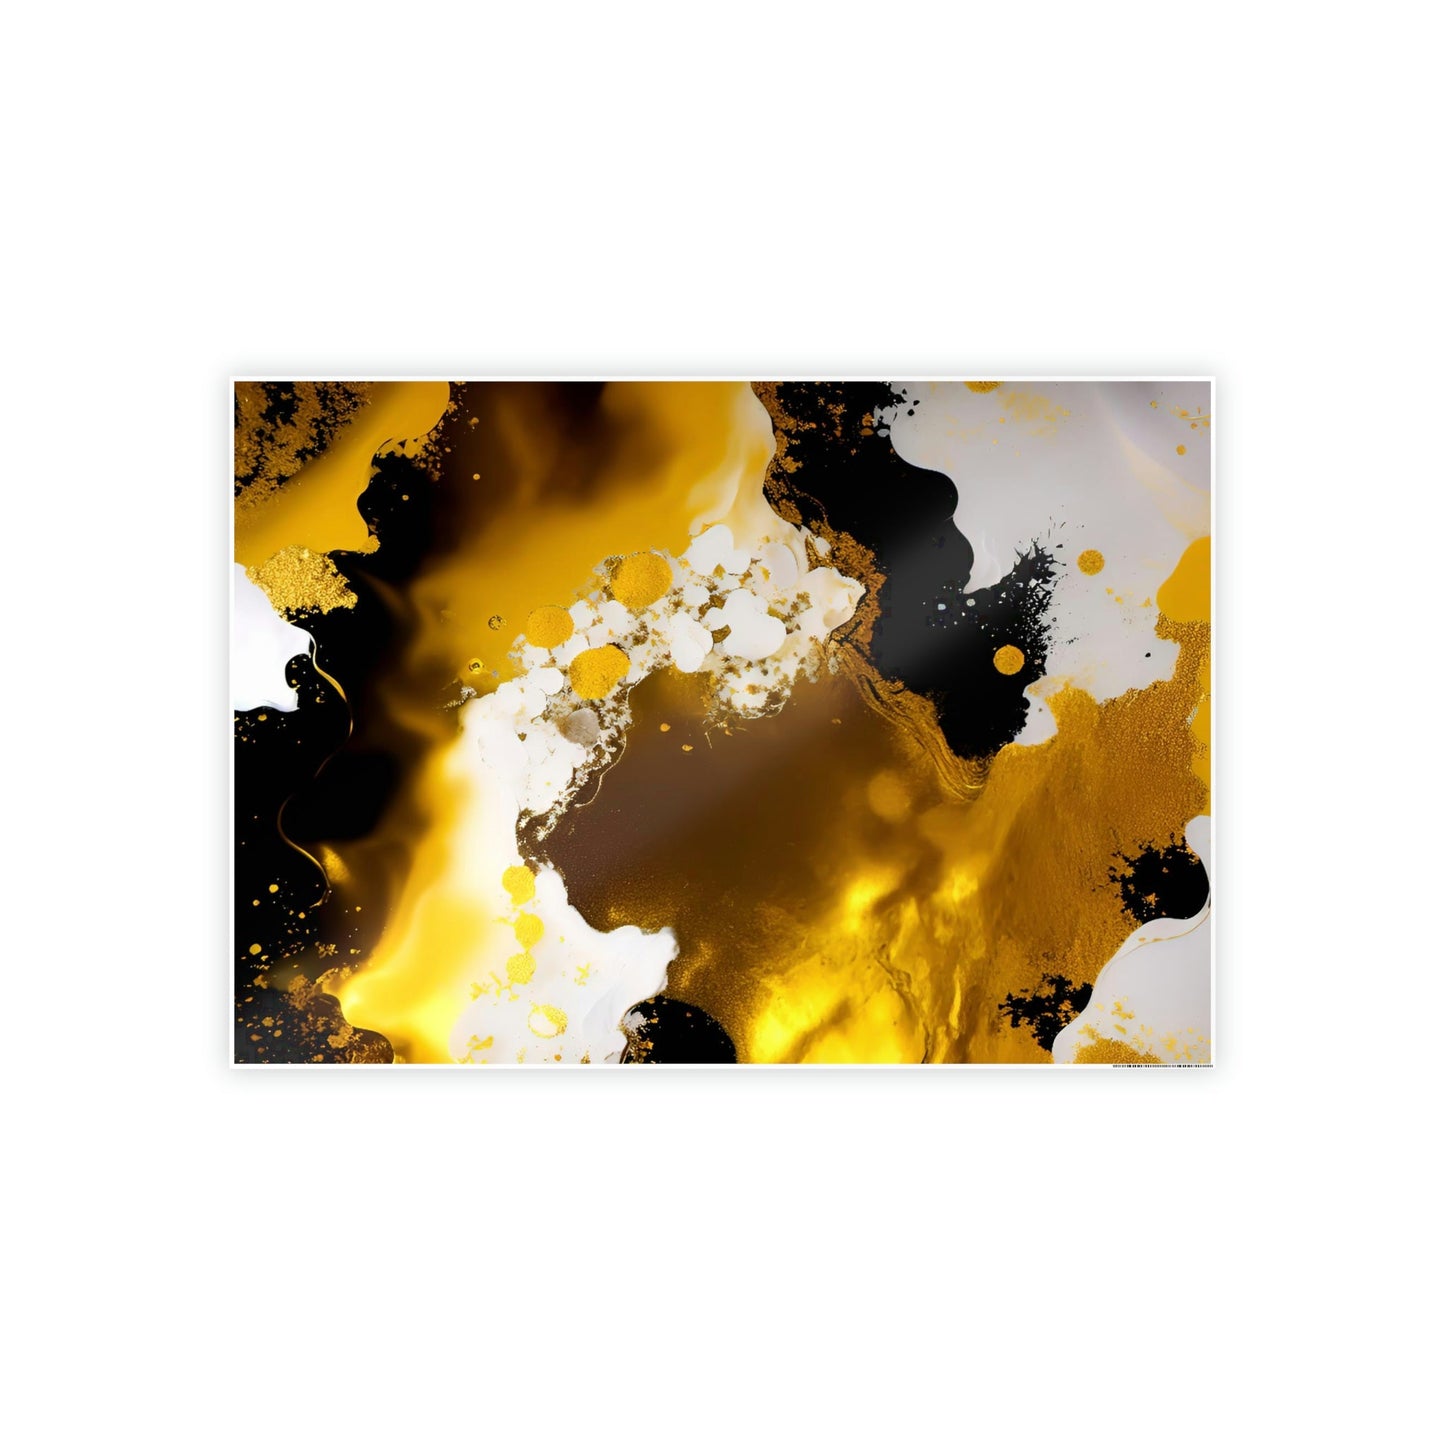 Opulent Reflections: Framed Canvas of Gold Abstract Wall Art